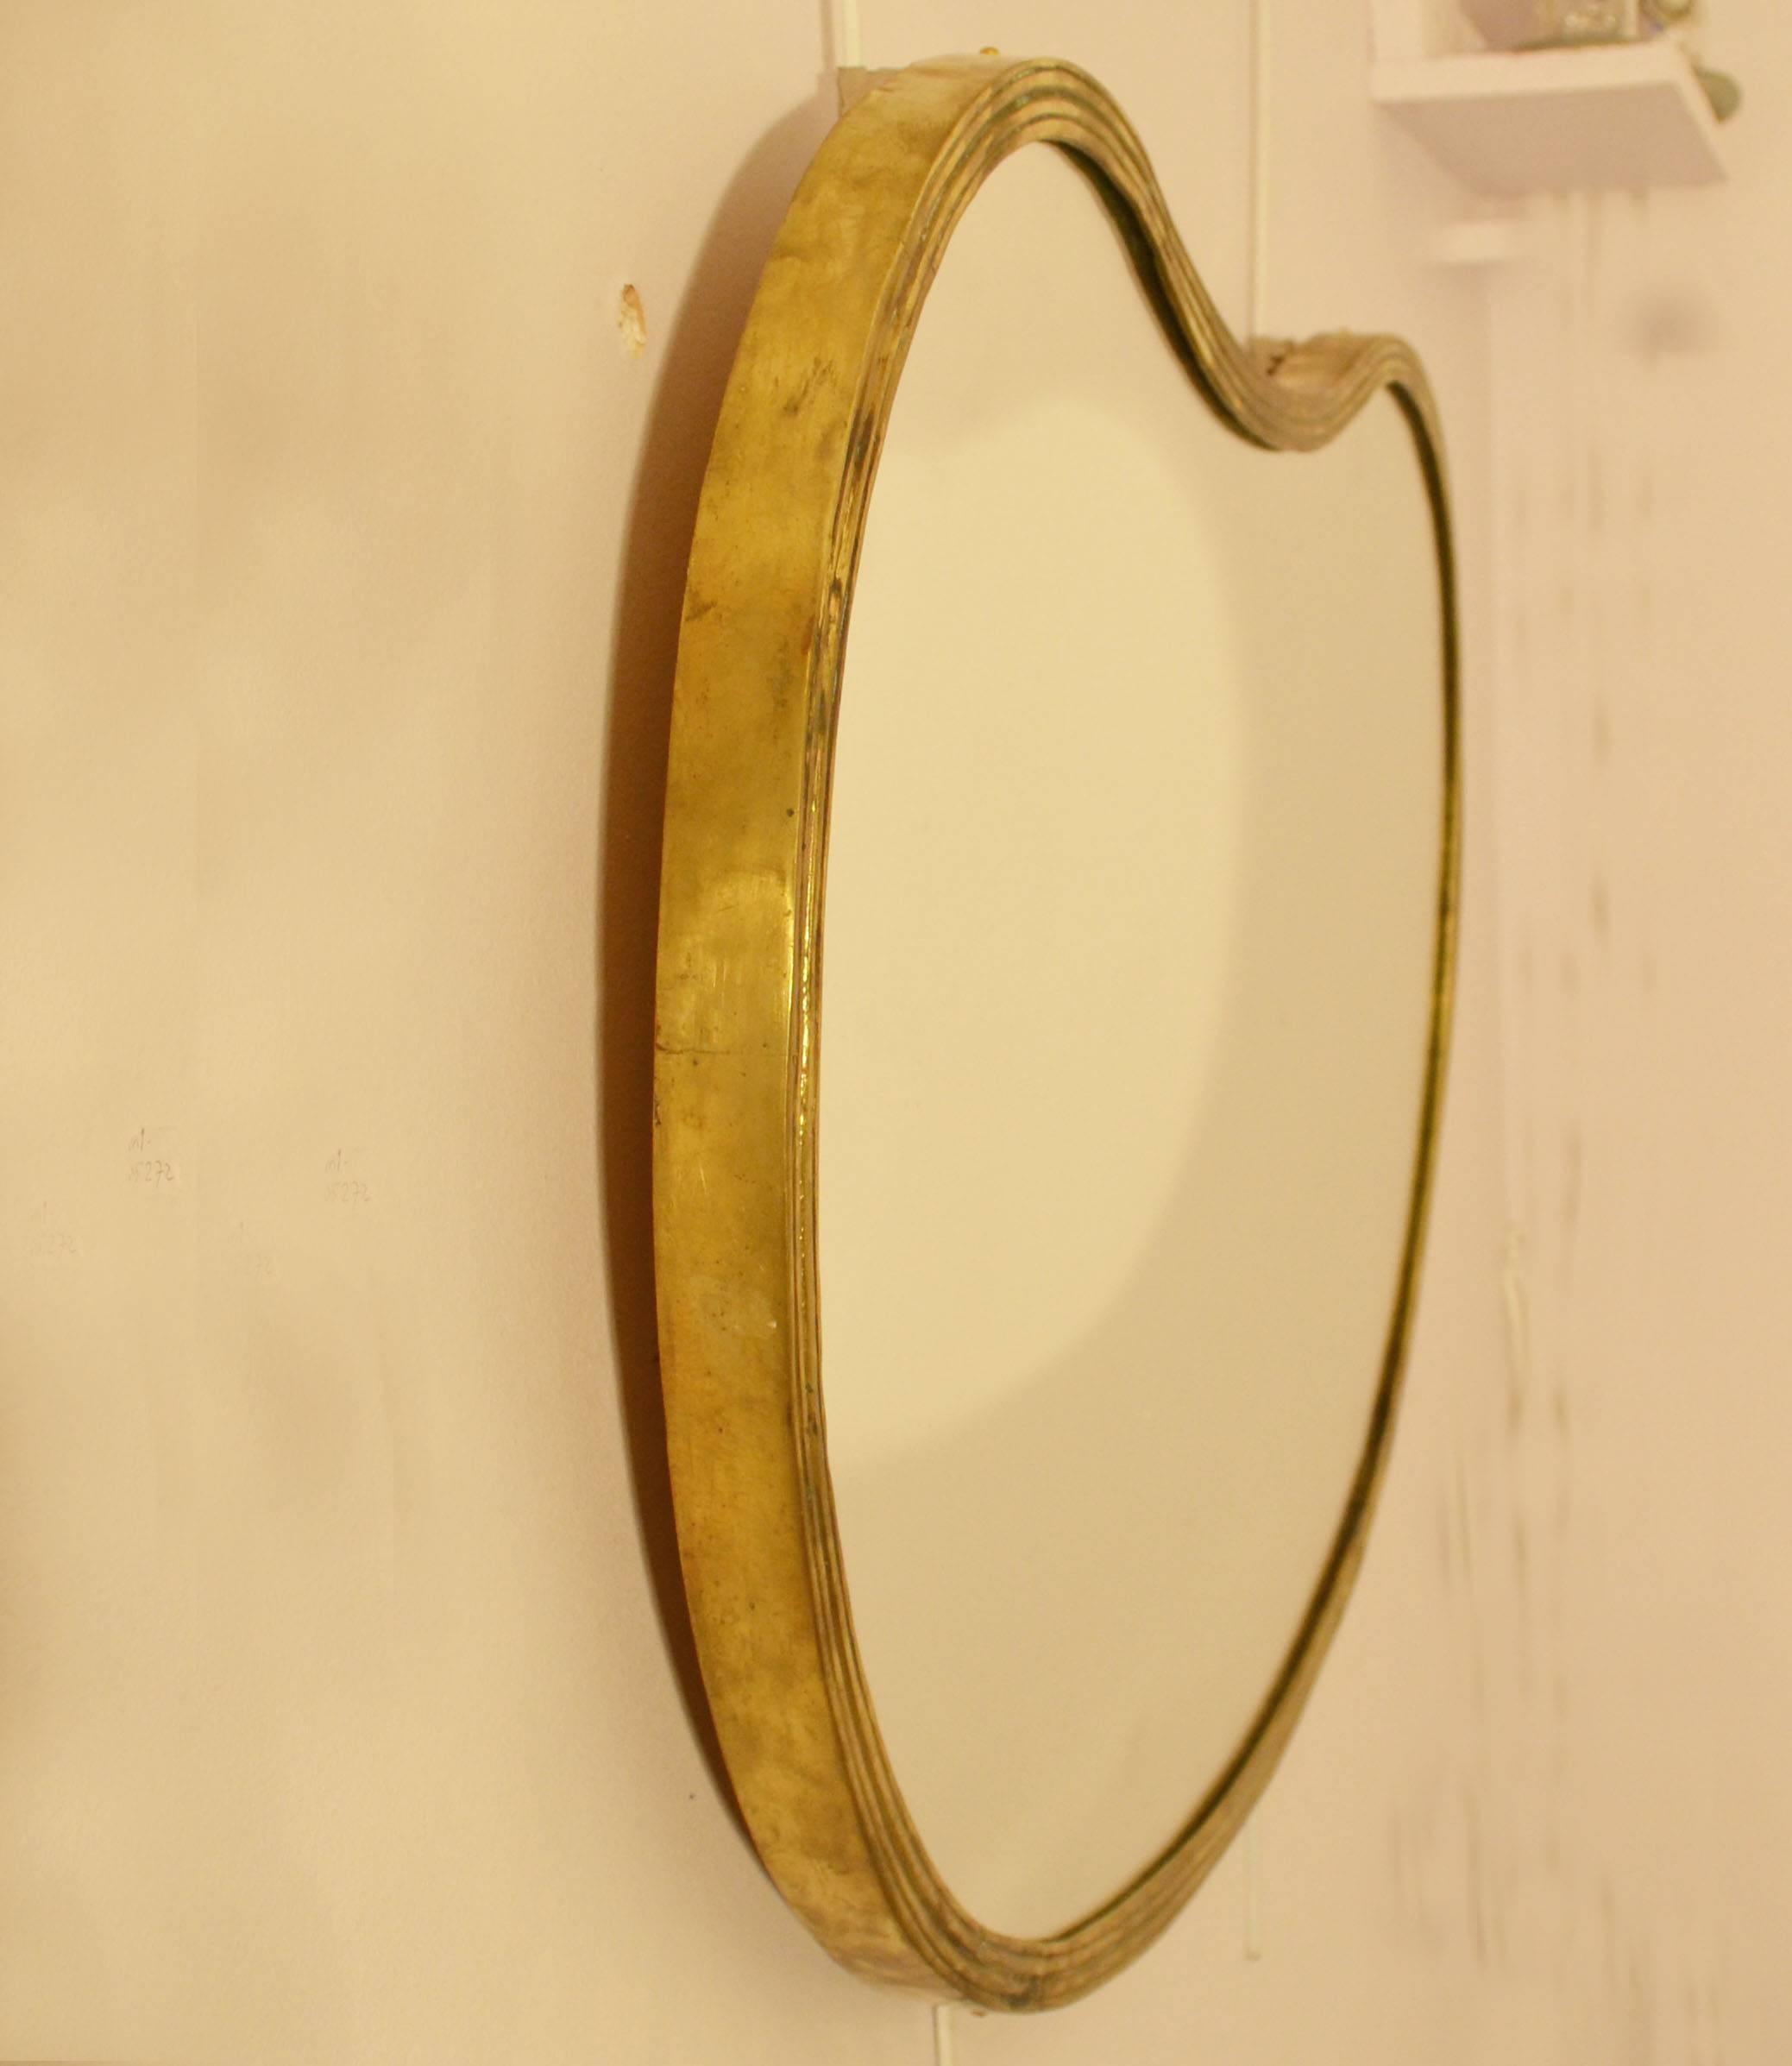 Free-form organic mirror with a patinated cast edge. The shape is emphasized by the channel of lines.